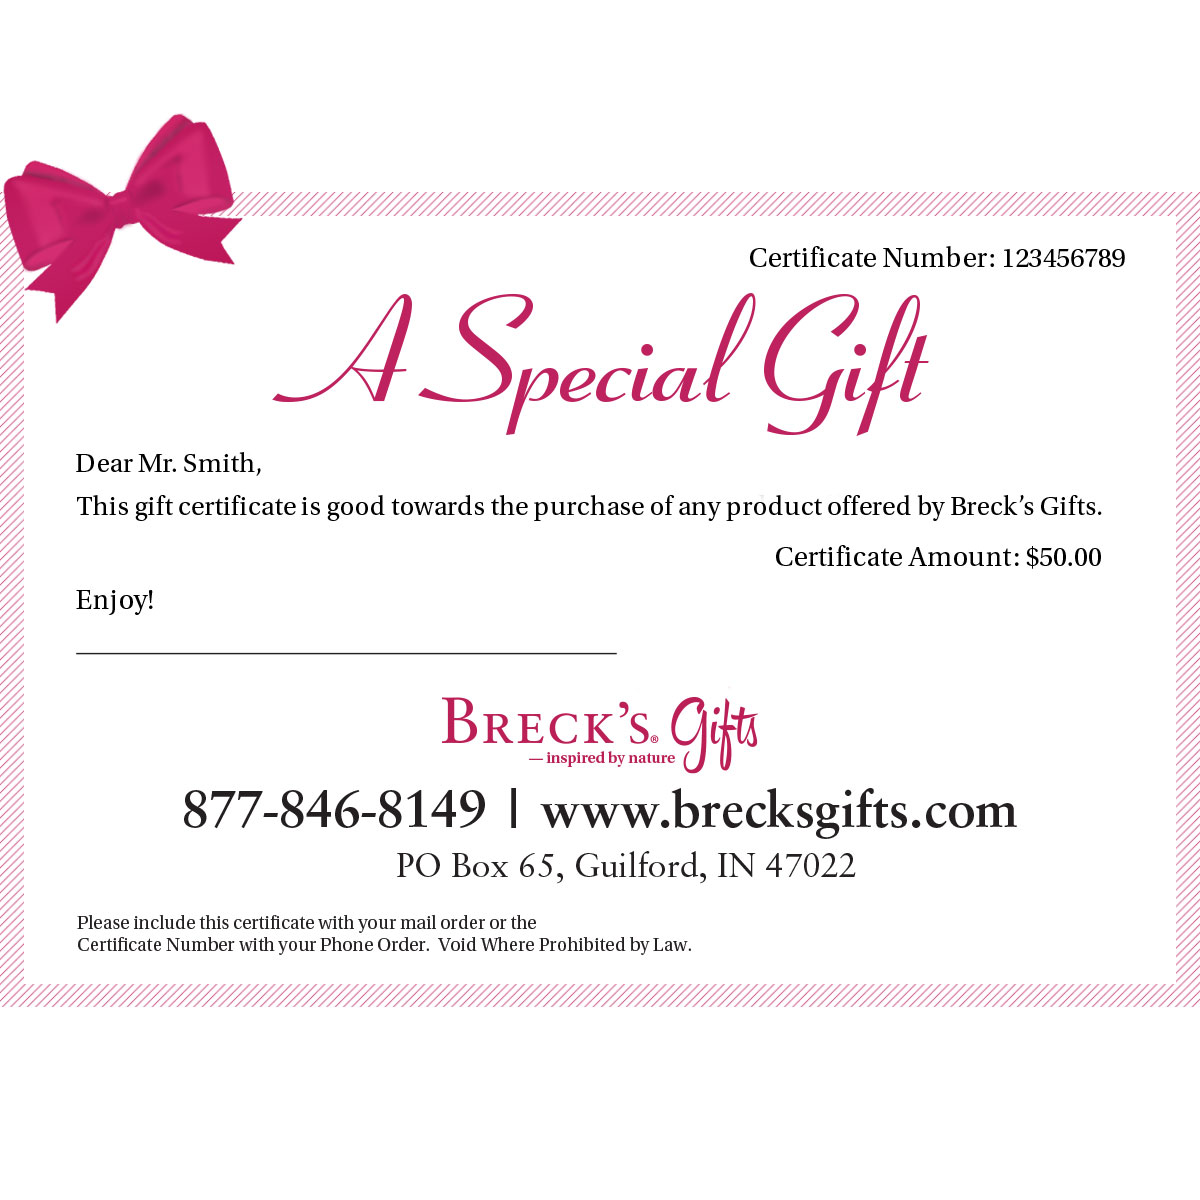 Breck's Gift Certificate